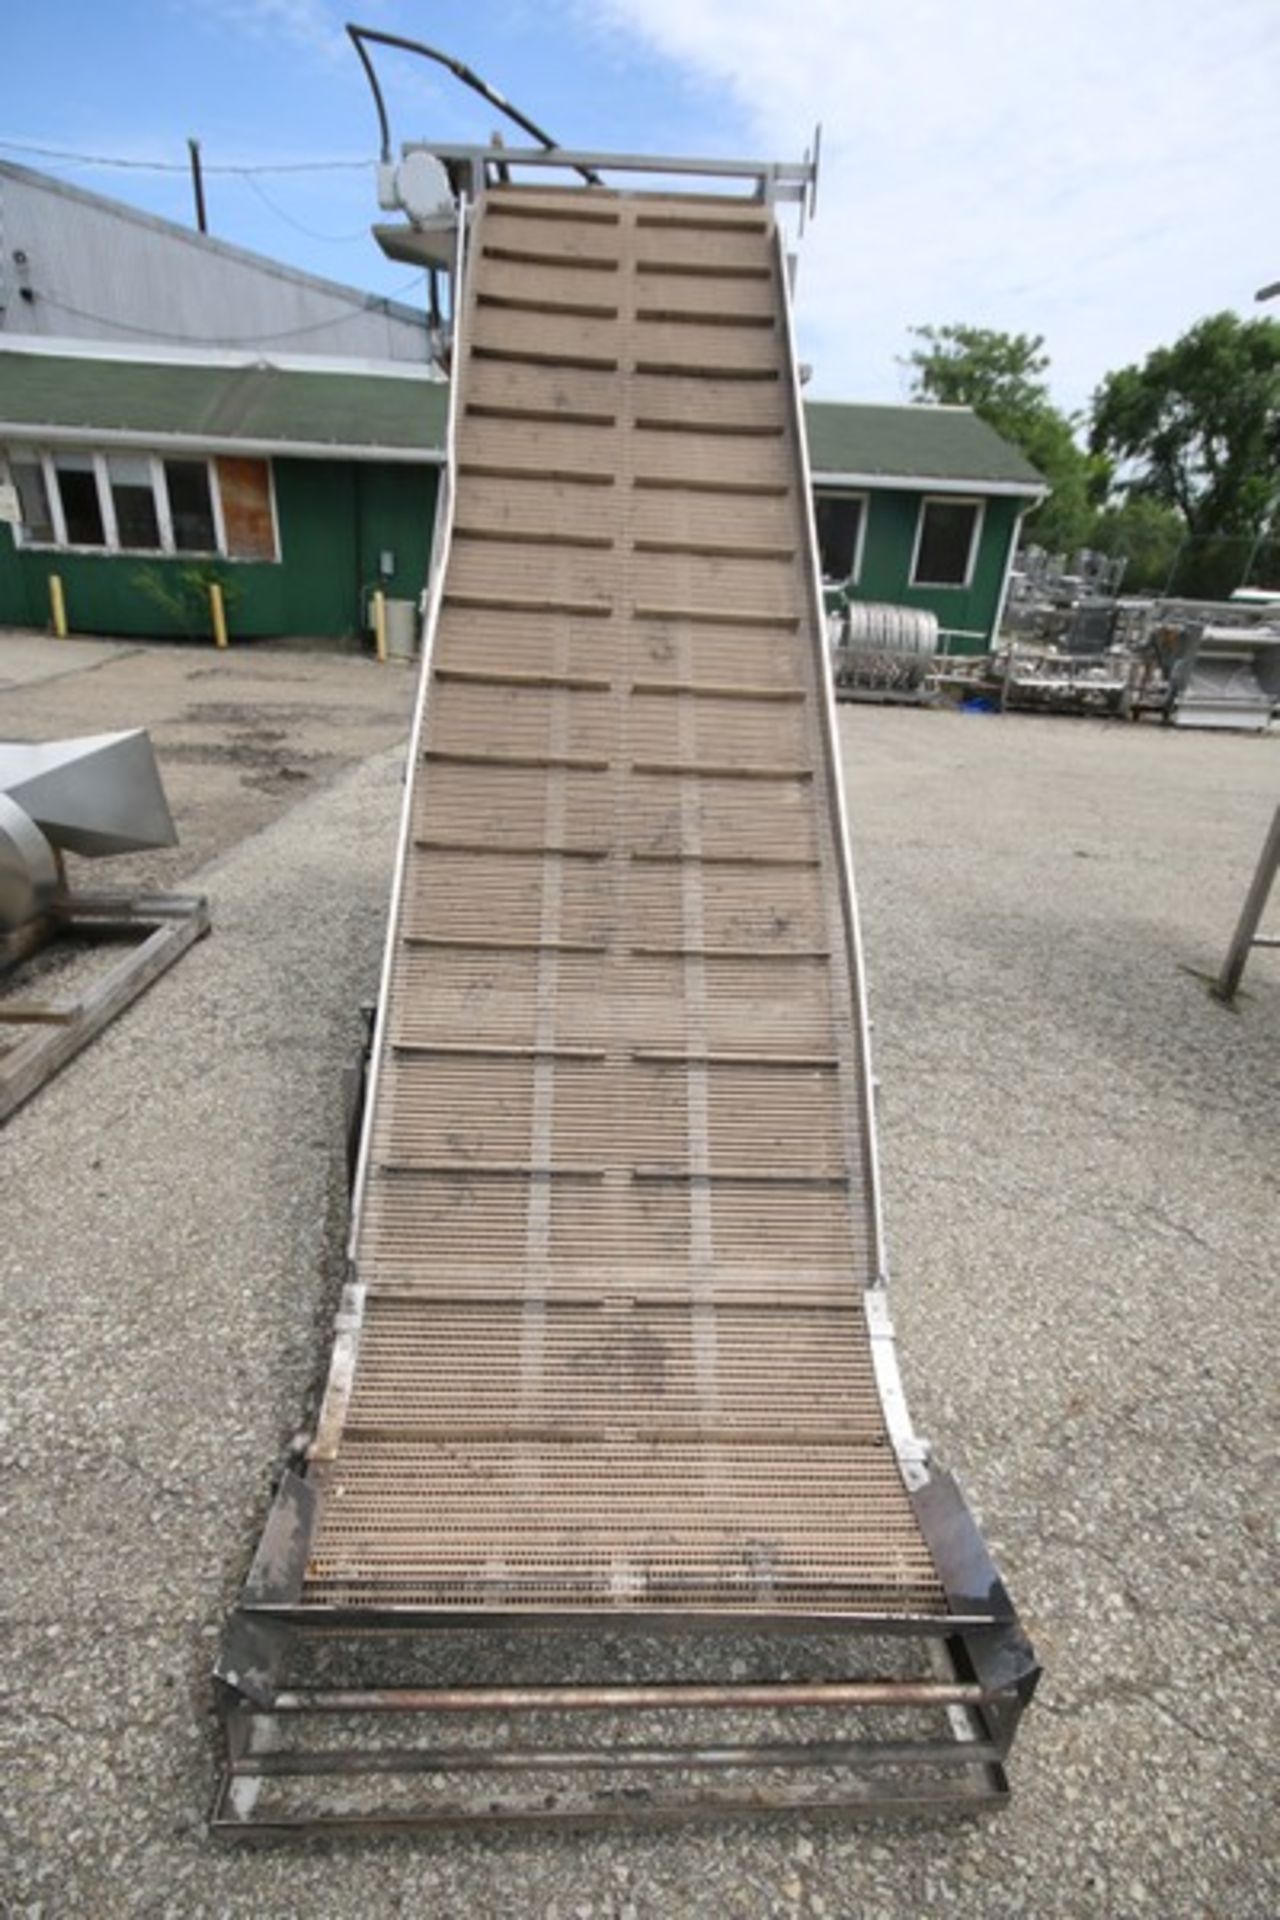 Aporx. 13' L x 36" W x 104" H S/S Inclined Conveyor with Intralox Type Belt with 8.5" Divider - Image 2 of 5